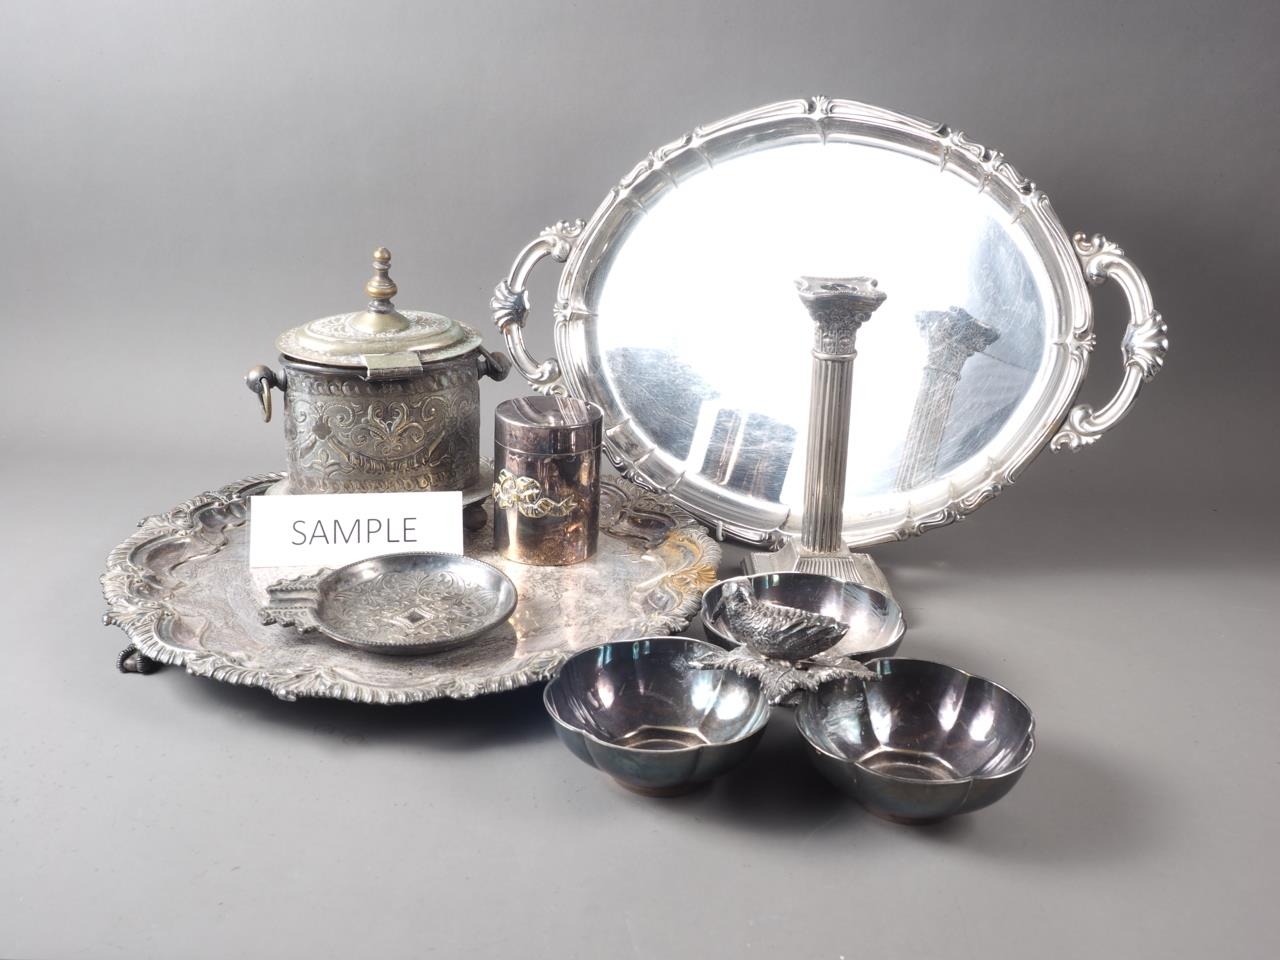 A silver plated engraved biscuit box, a plated and engraved salver, two plated trays and other items